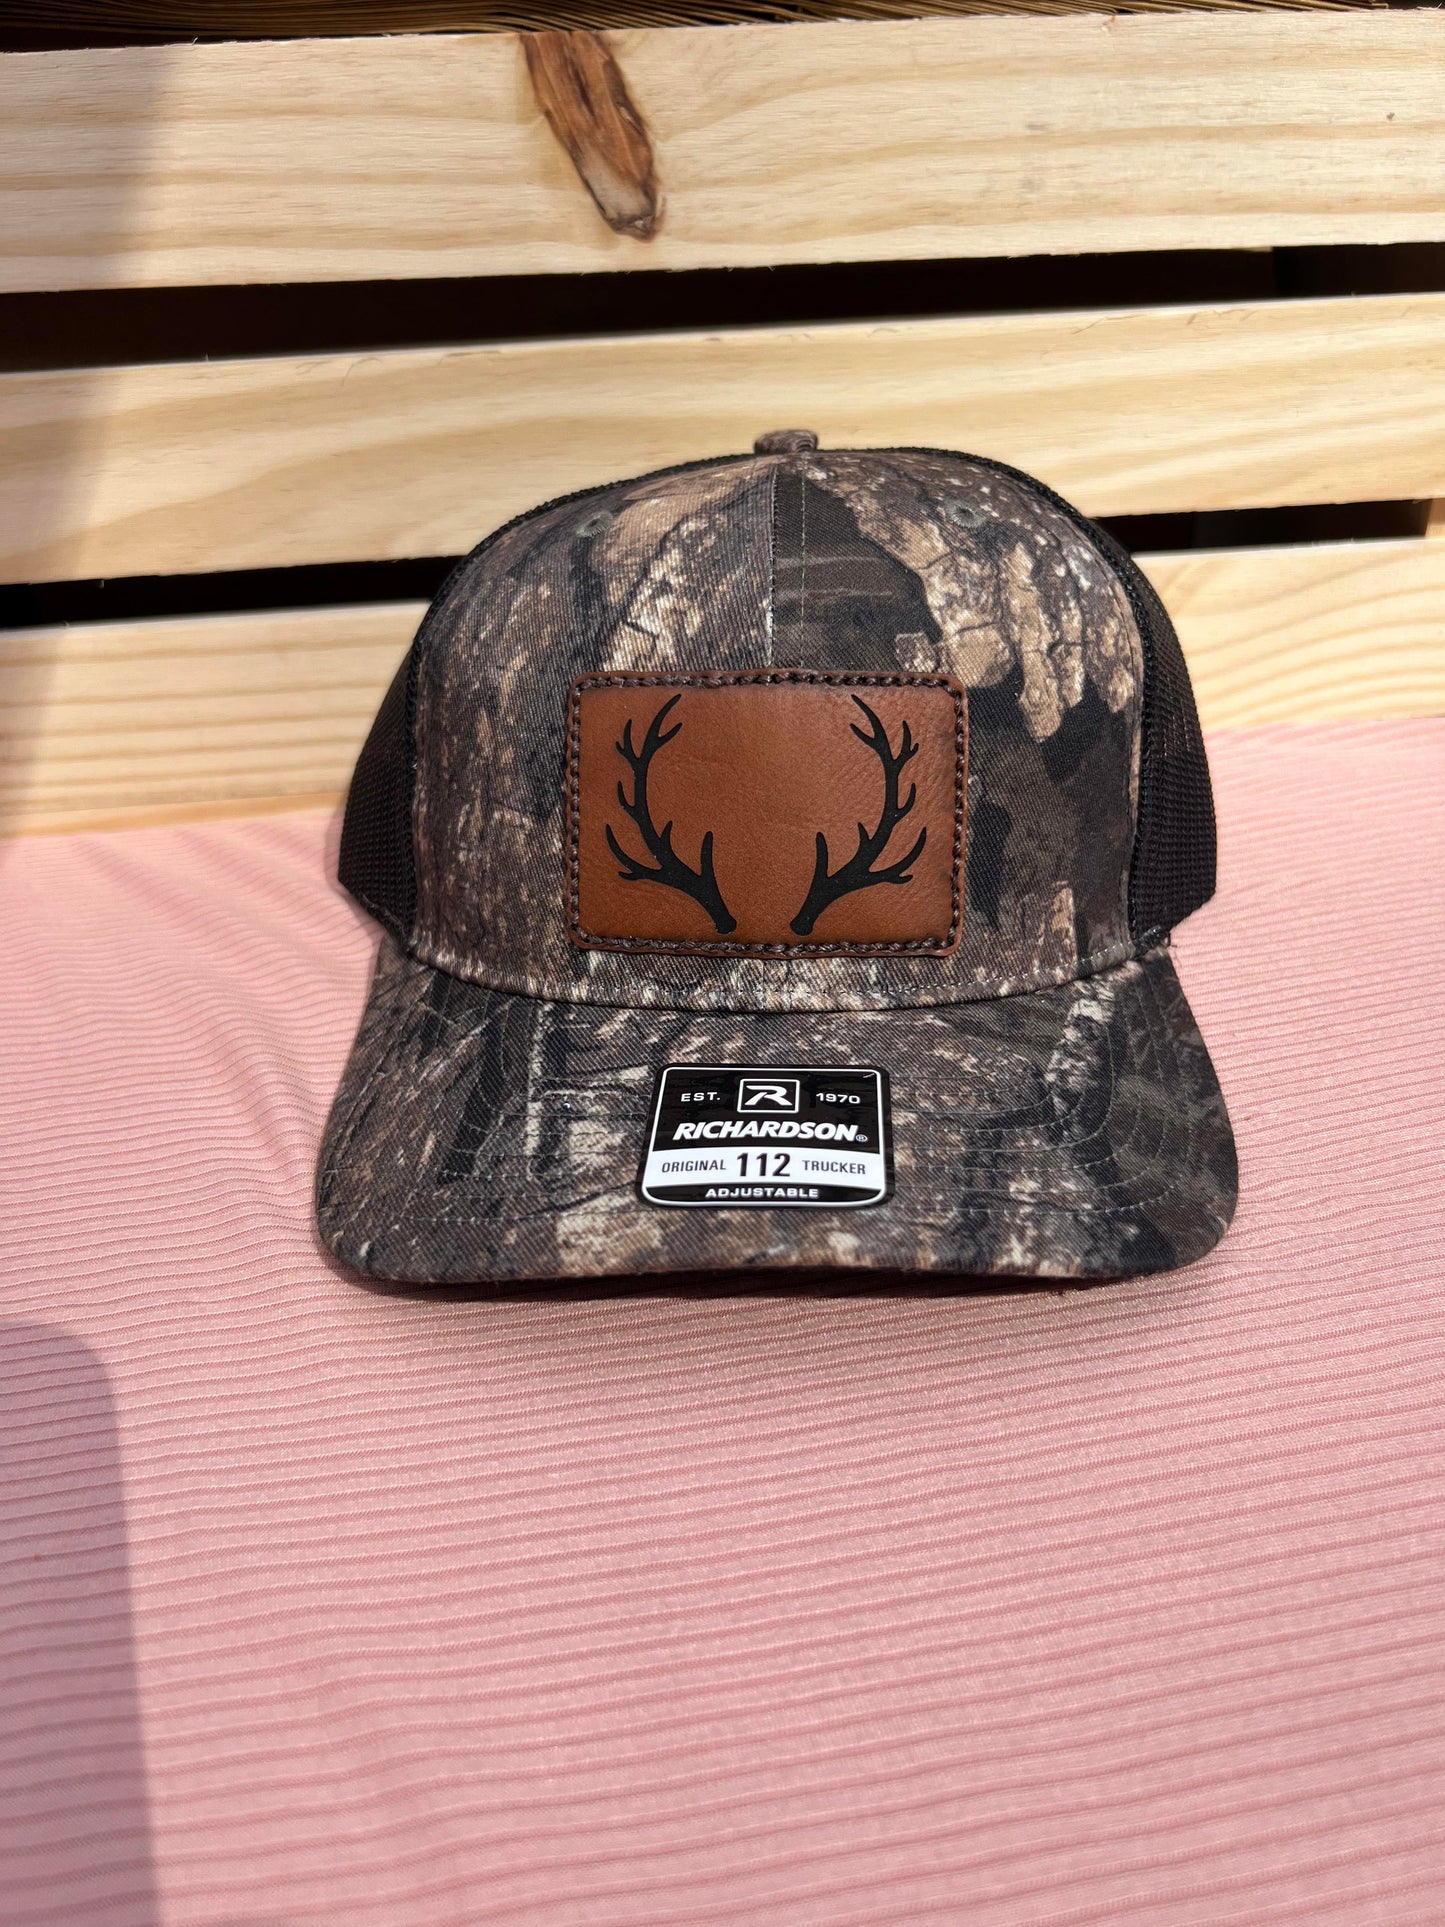 Deer antlers Realtree Timber/Black Richardson 112 leather patch hat